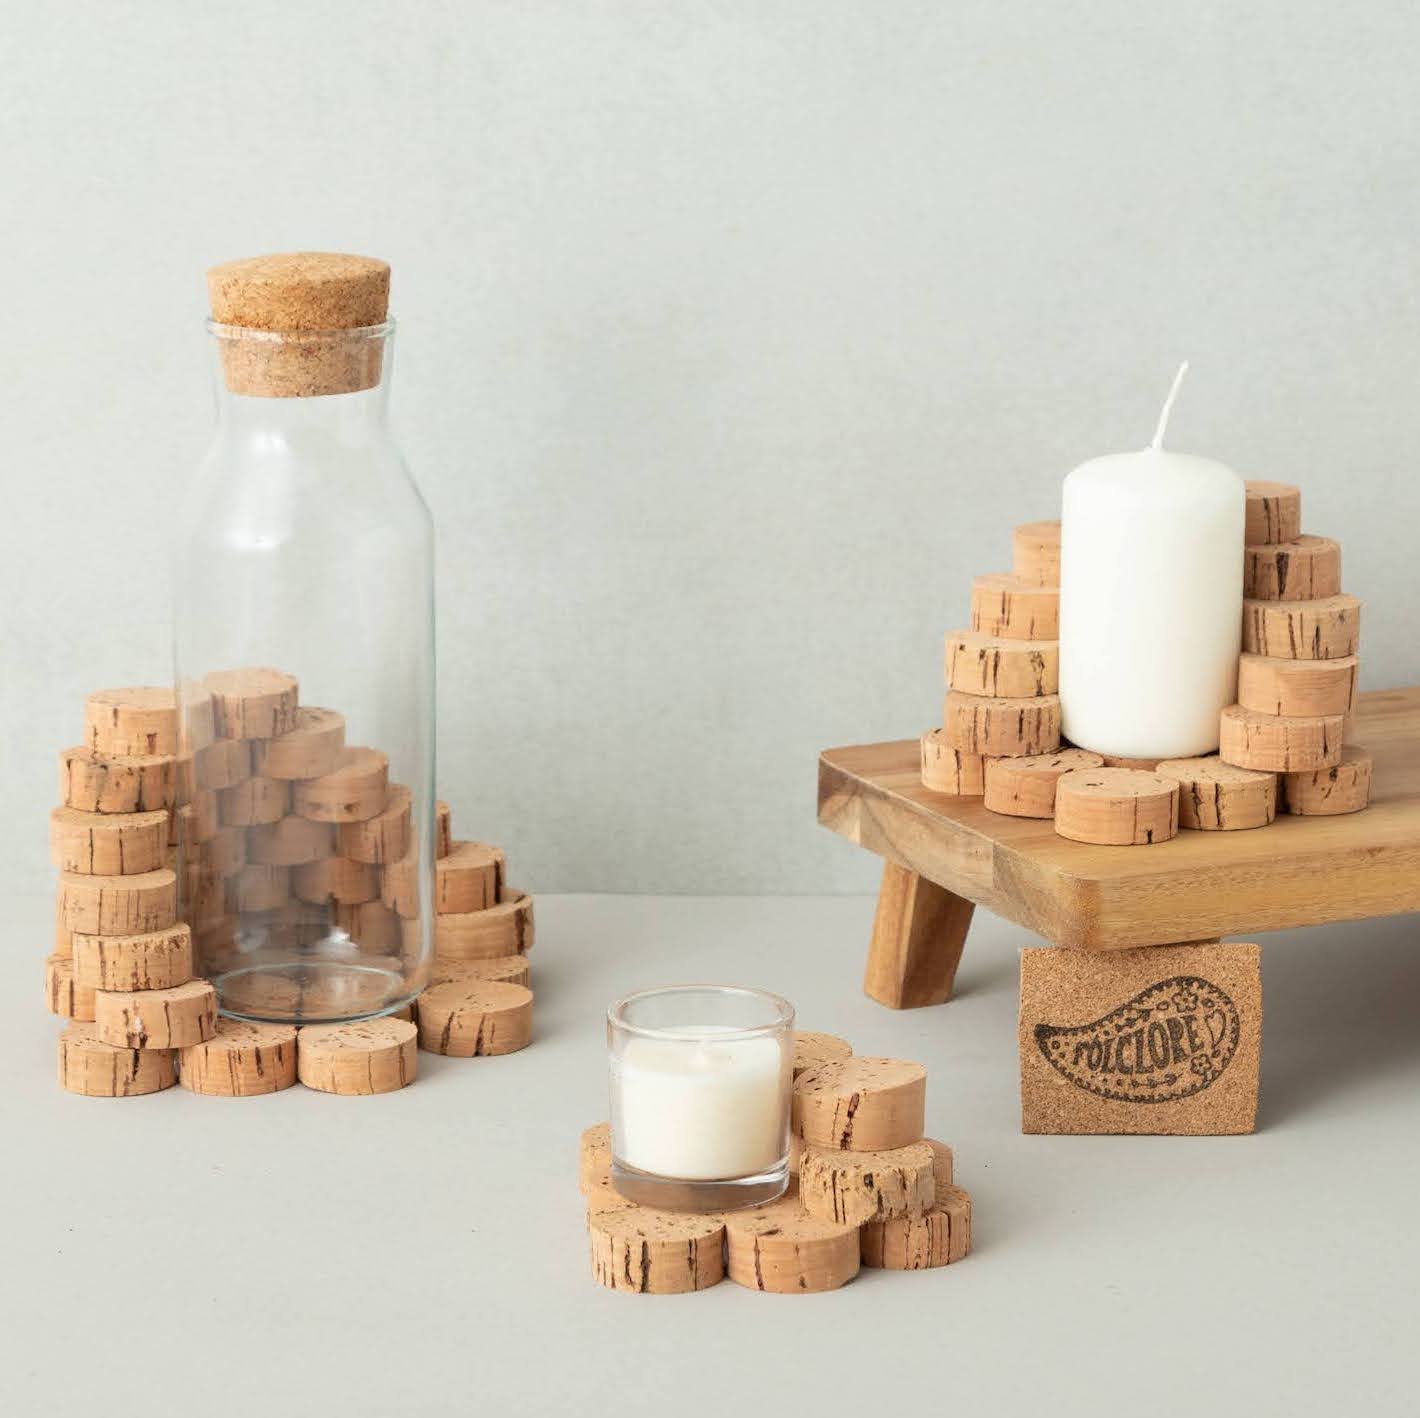 bottle and candle holders made from cork discs